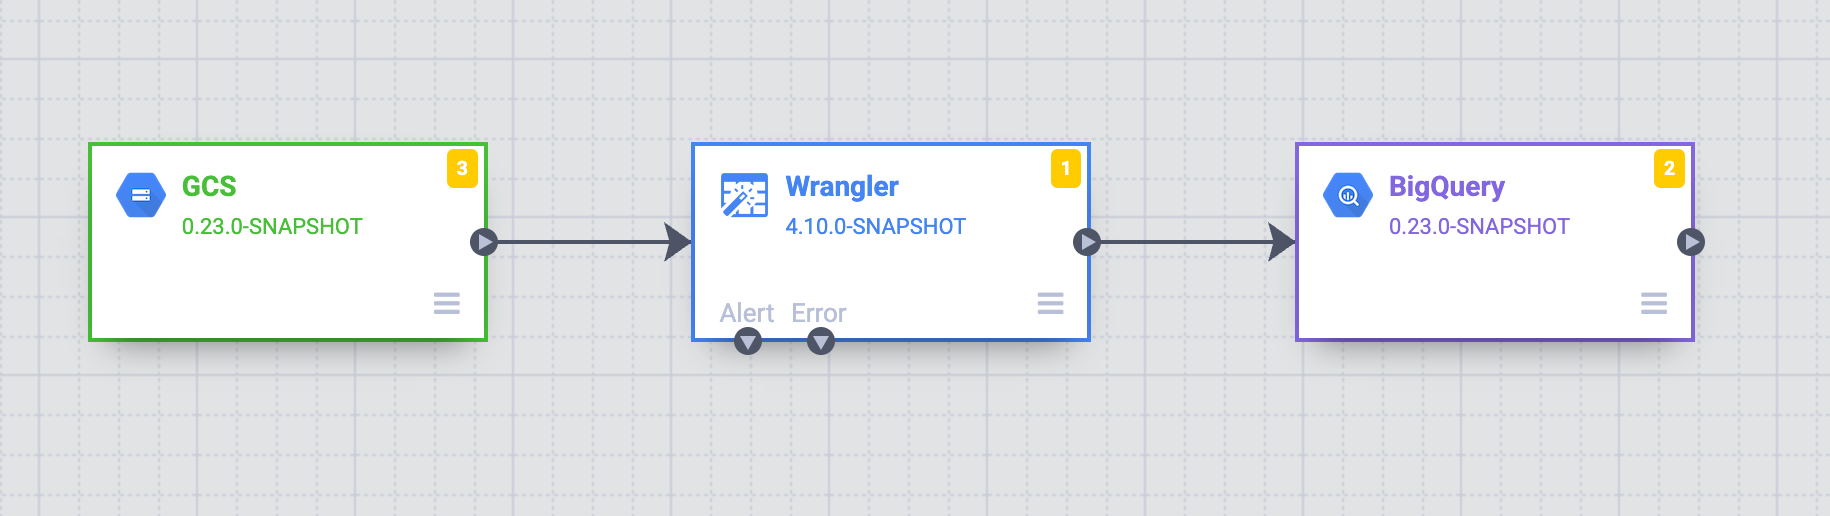 Data pipeline showing Cloud Storage source, Wrangler transform, and BigQuery sink.